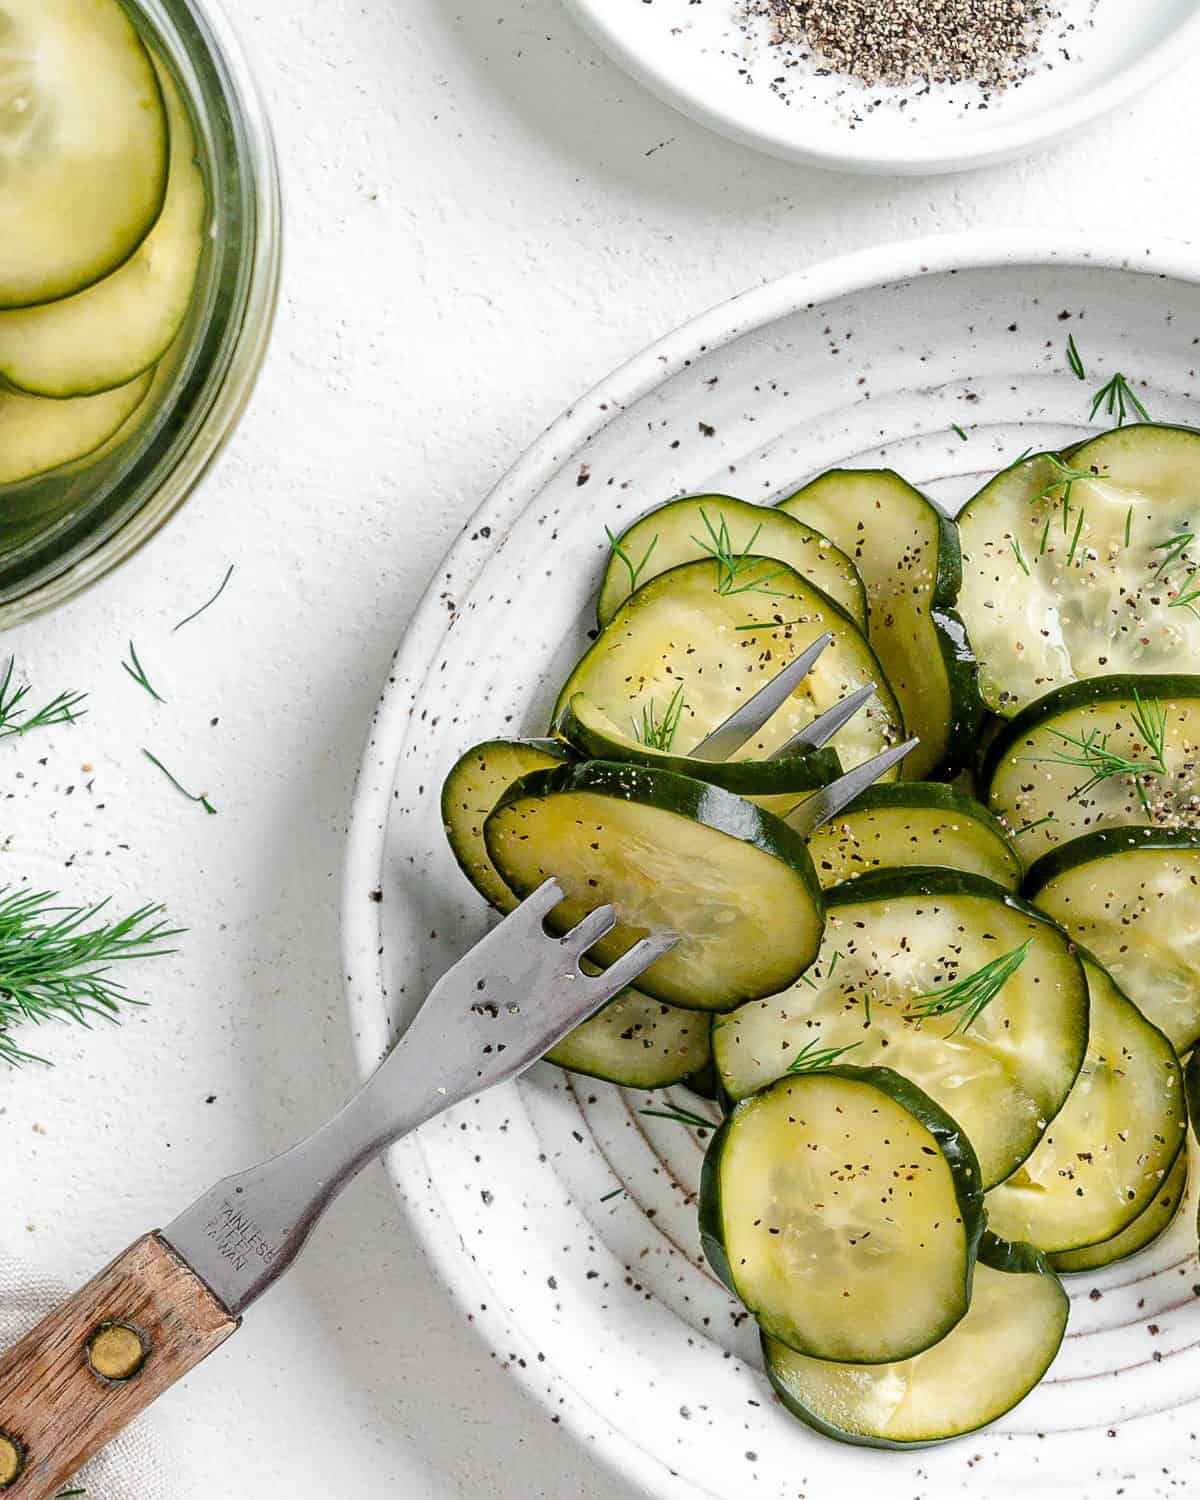 completed Marinated Cucumber Salad on a white plate with a frok in two pieces against a white surface